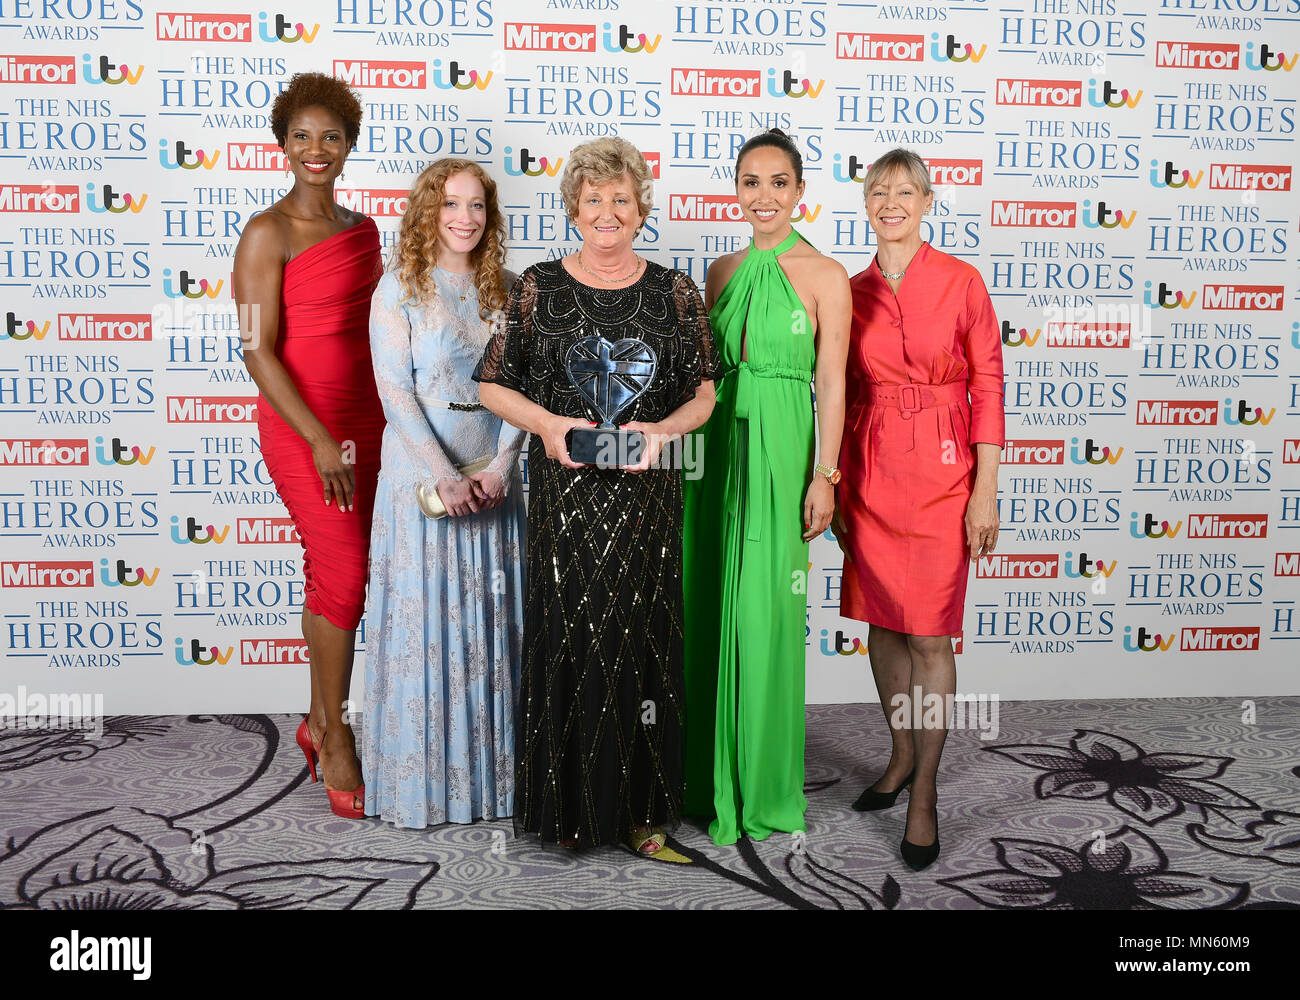 Betty McIntyre (centre) wins the Hero Nurse Award at the NHS Heroes Awards, presented by (left to right) Denise Lewis, Victoria Yeates, Myleene Klass and Jenny Agutter, at the Hilton Hotel in London. Stock Photo